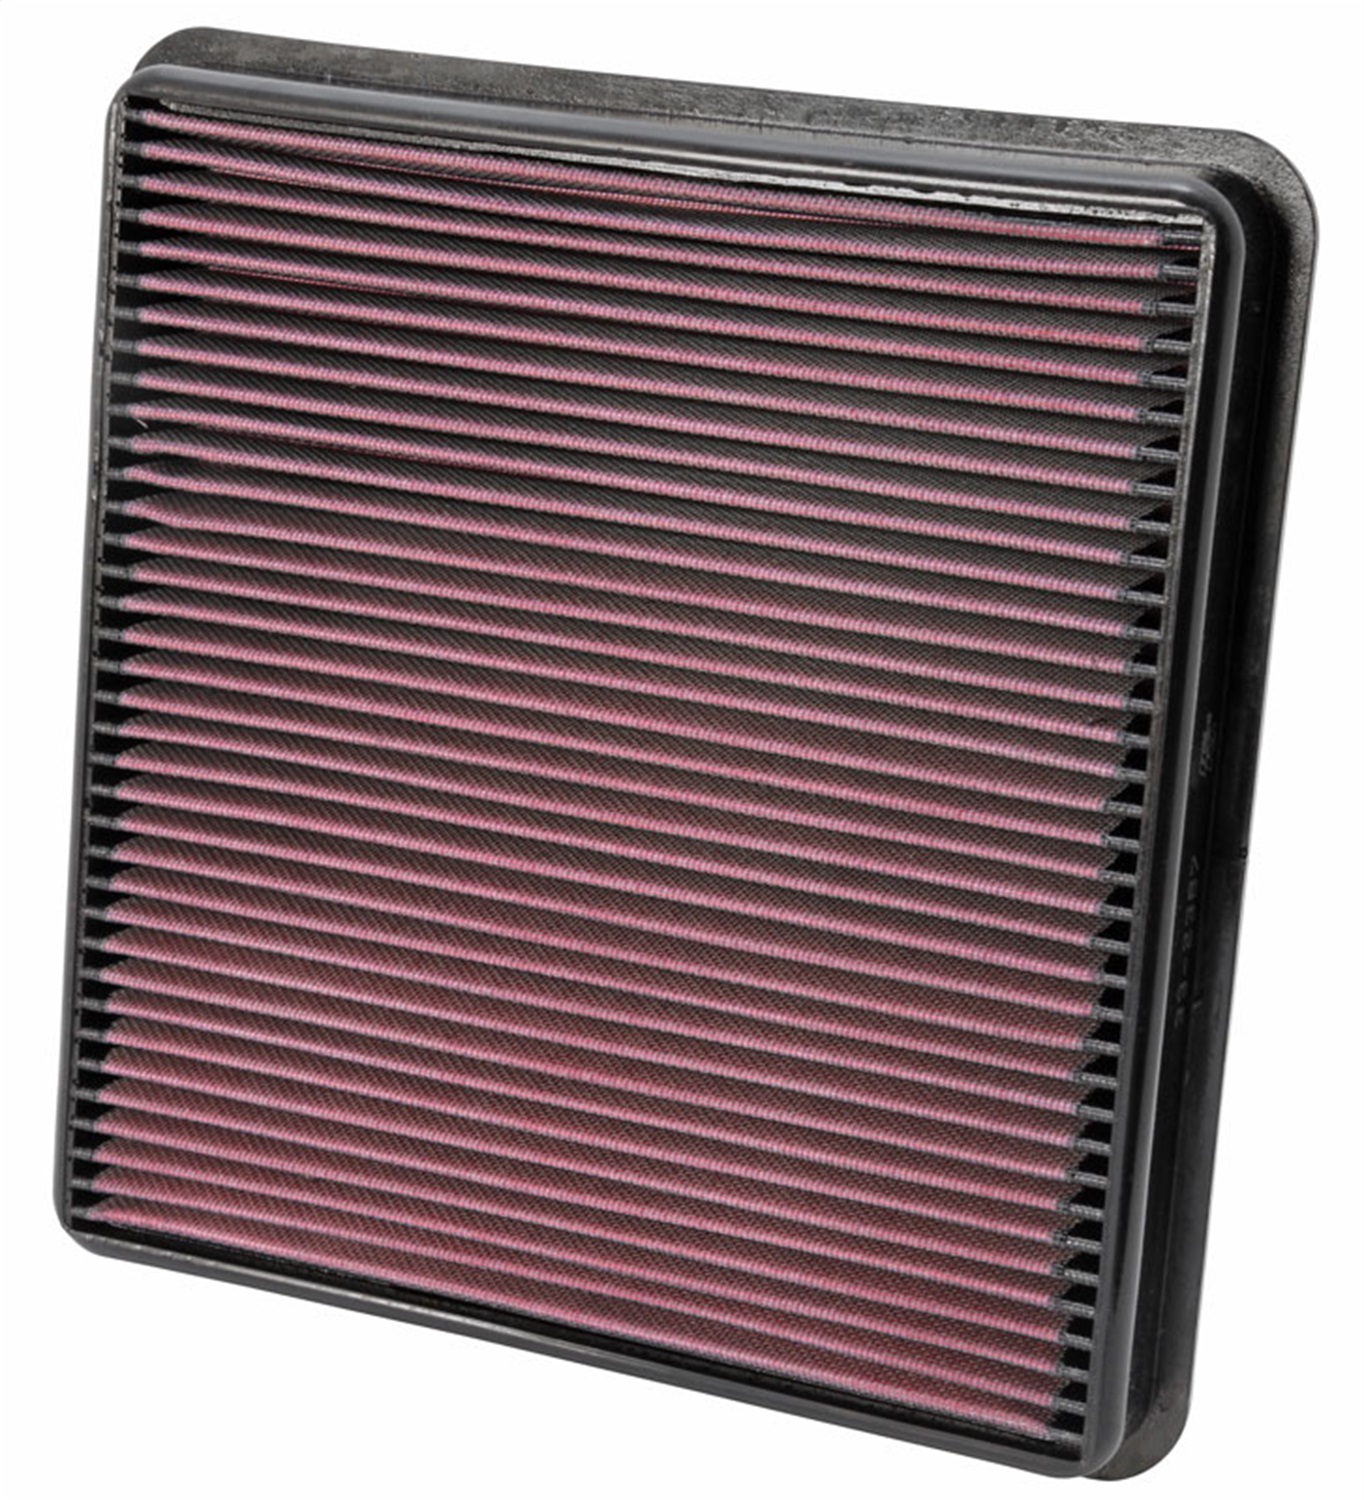 K&N Filters K&N Filters 33-2387 Air Filter Fits 07-15 Land Cruiser LX570 Sequoia Tundra